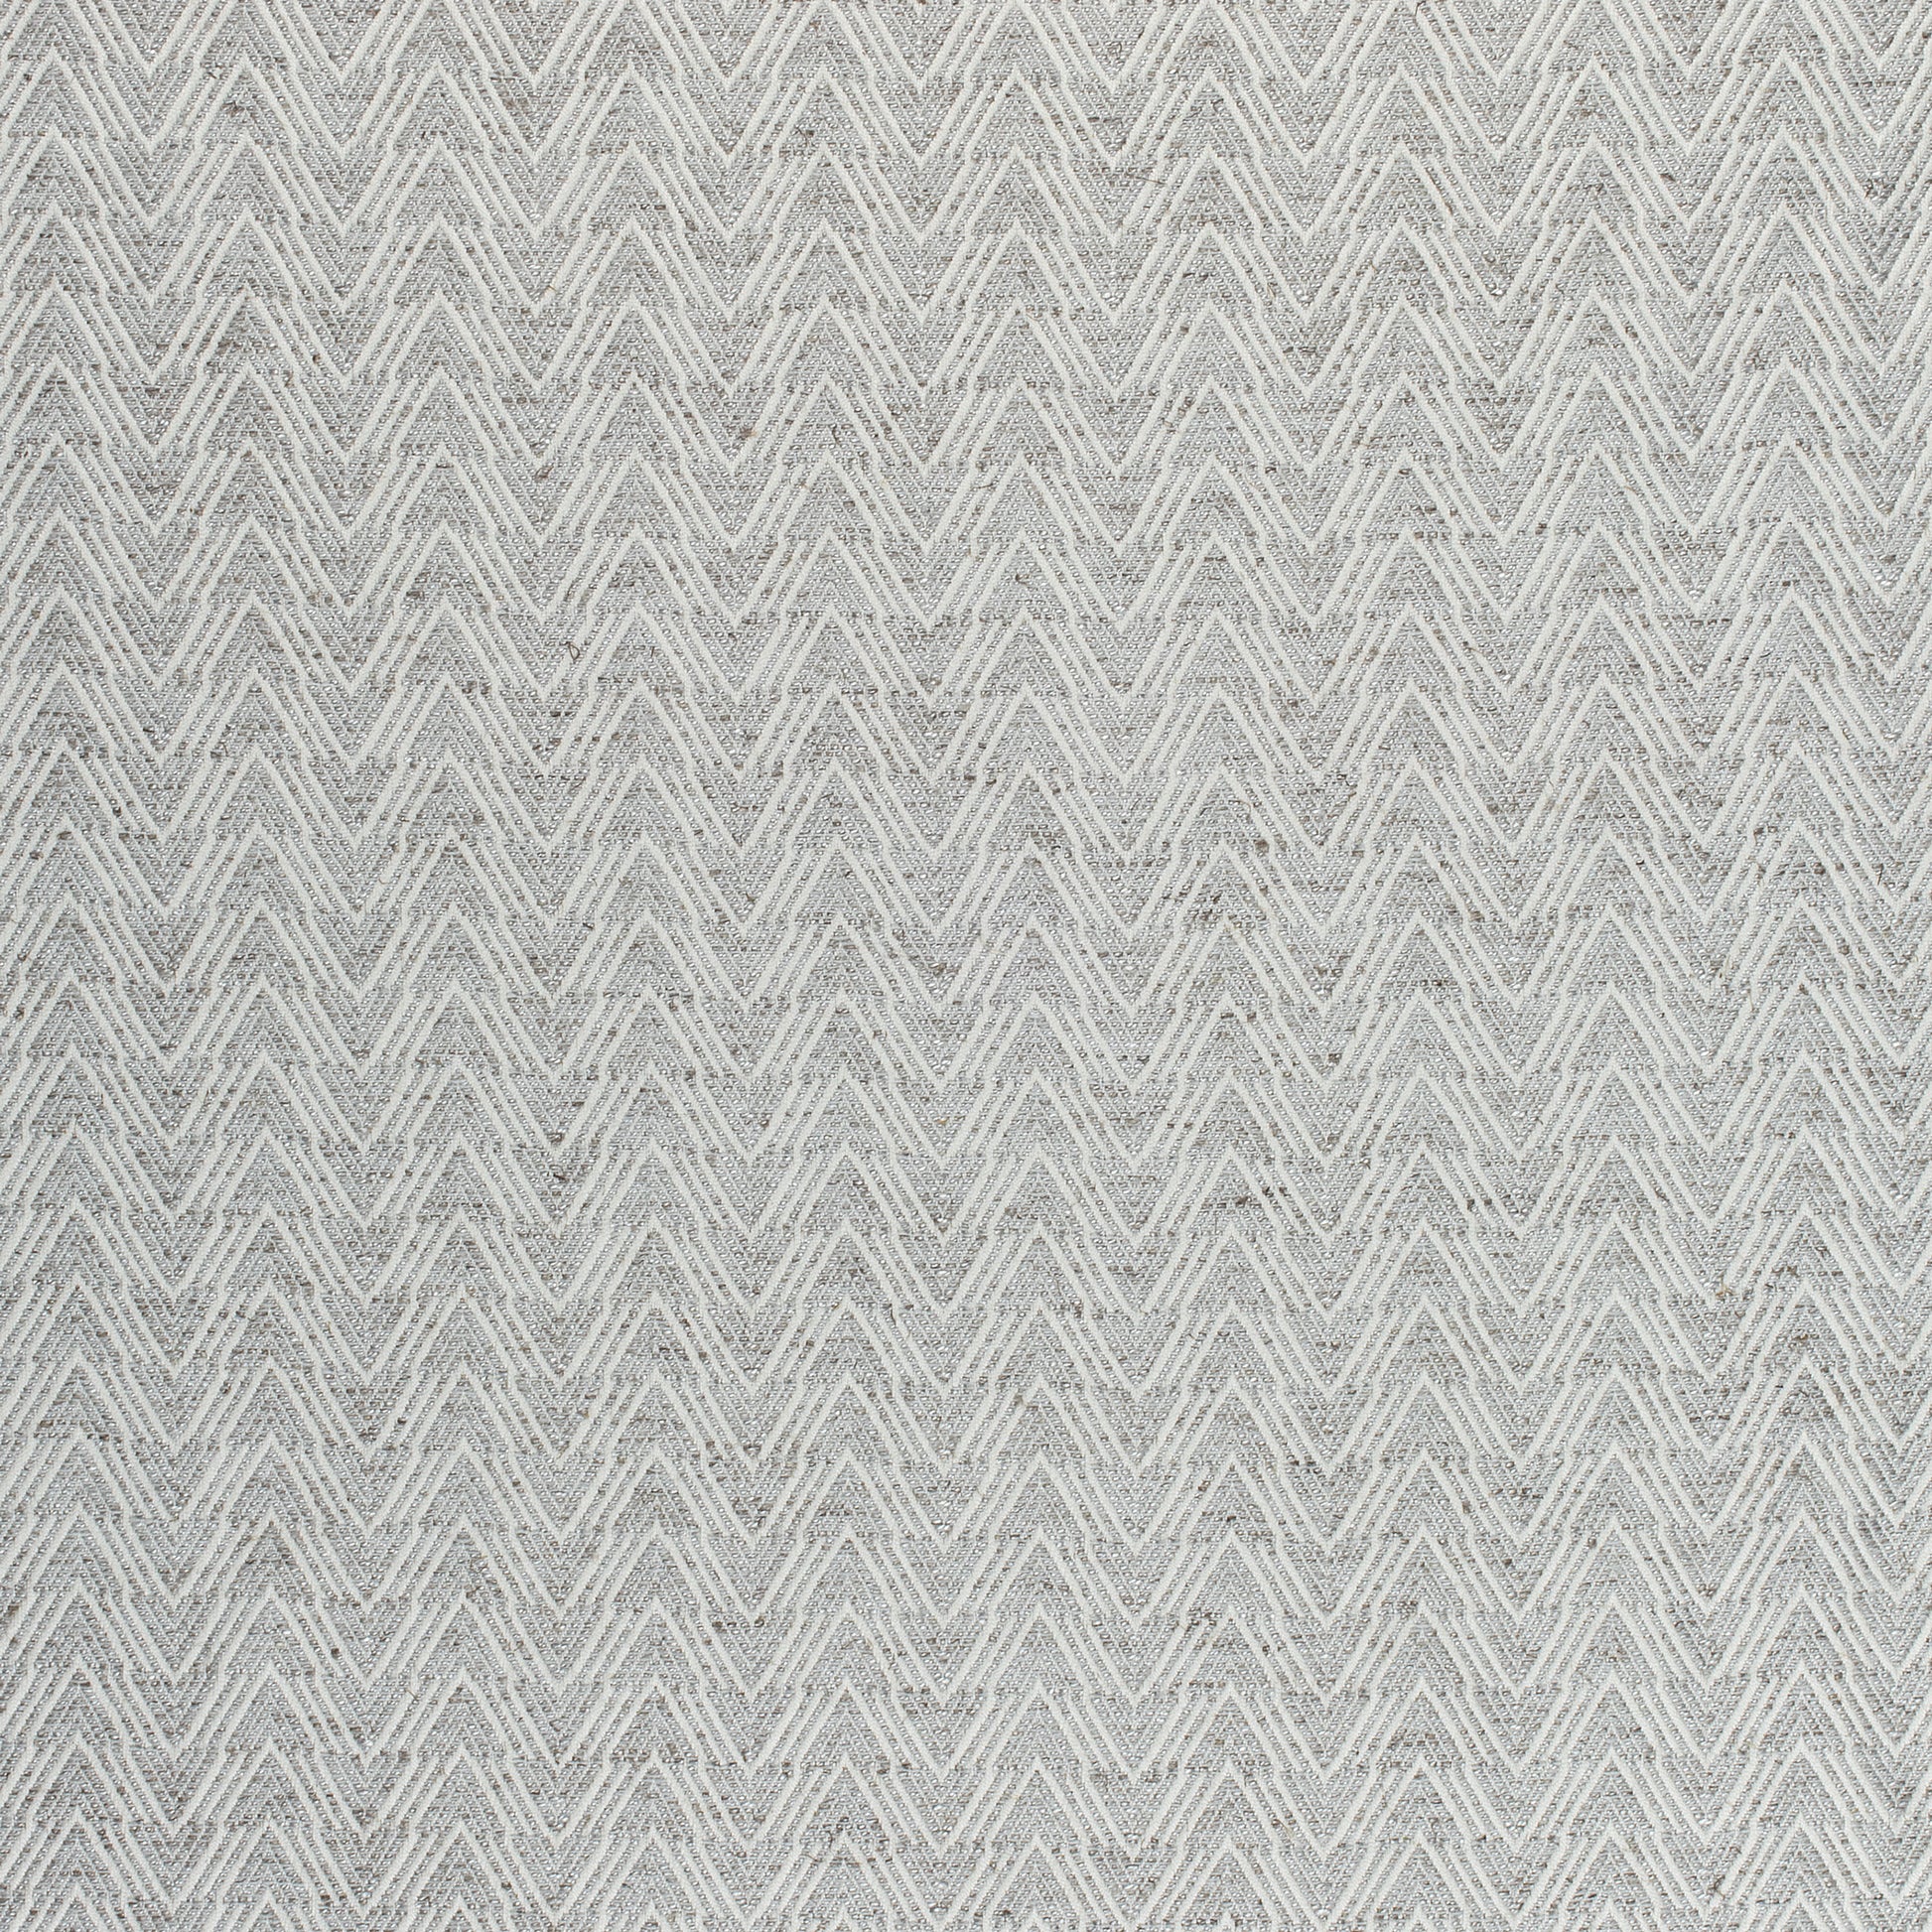 Purchase Thibaut Fabric Item# W80649 pattern name Gatsby color Sterling Grey